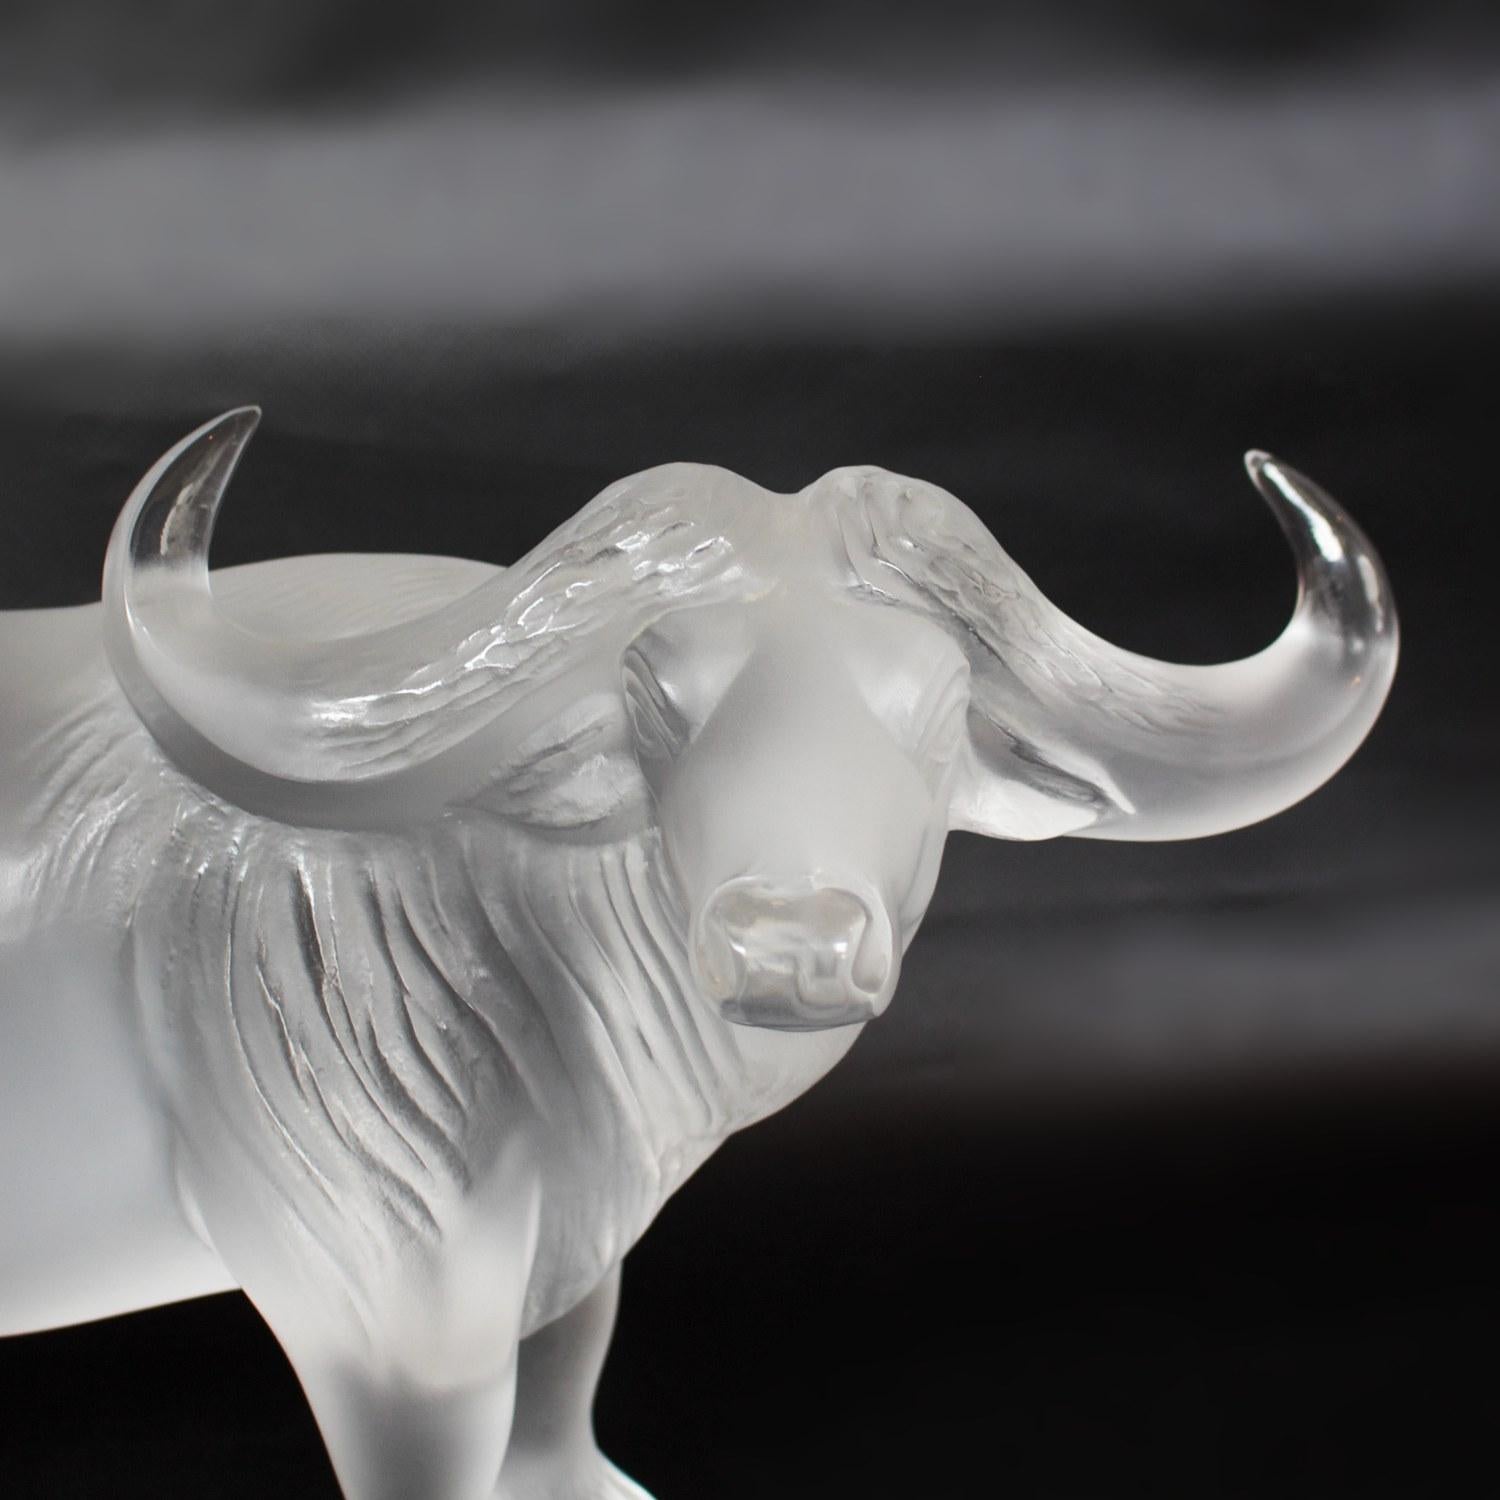 'Nam', a clear and frosted crystal glass water buffalo by Lalique.

Faintly etched 'Lalique France' to back of hoof.

Dimensions: H 11cm, W 38cm, D 9cm

Origin: French

Date: circa 1980

Item number: 907207.